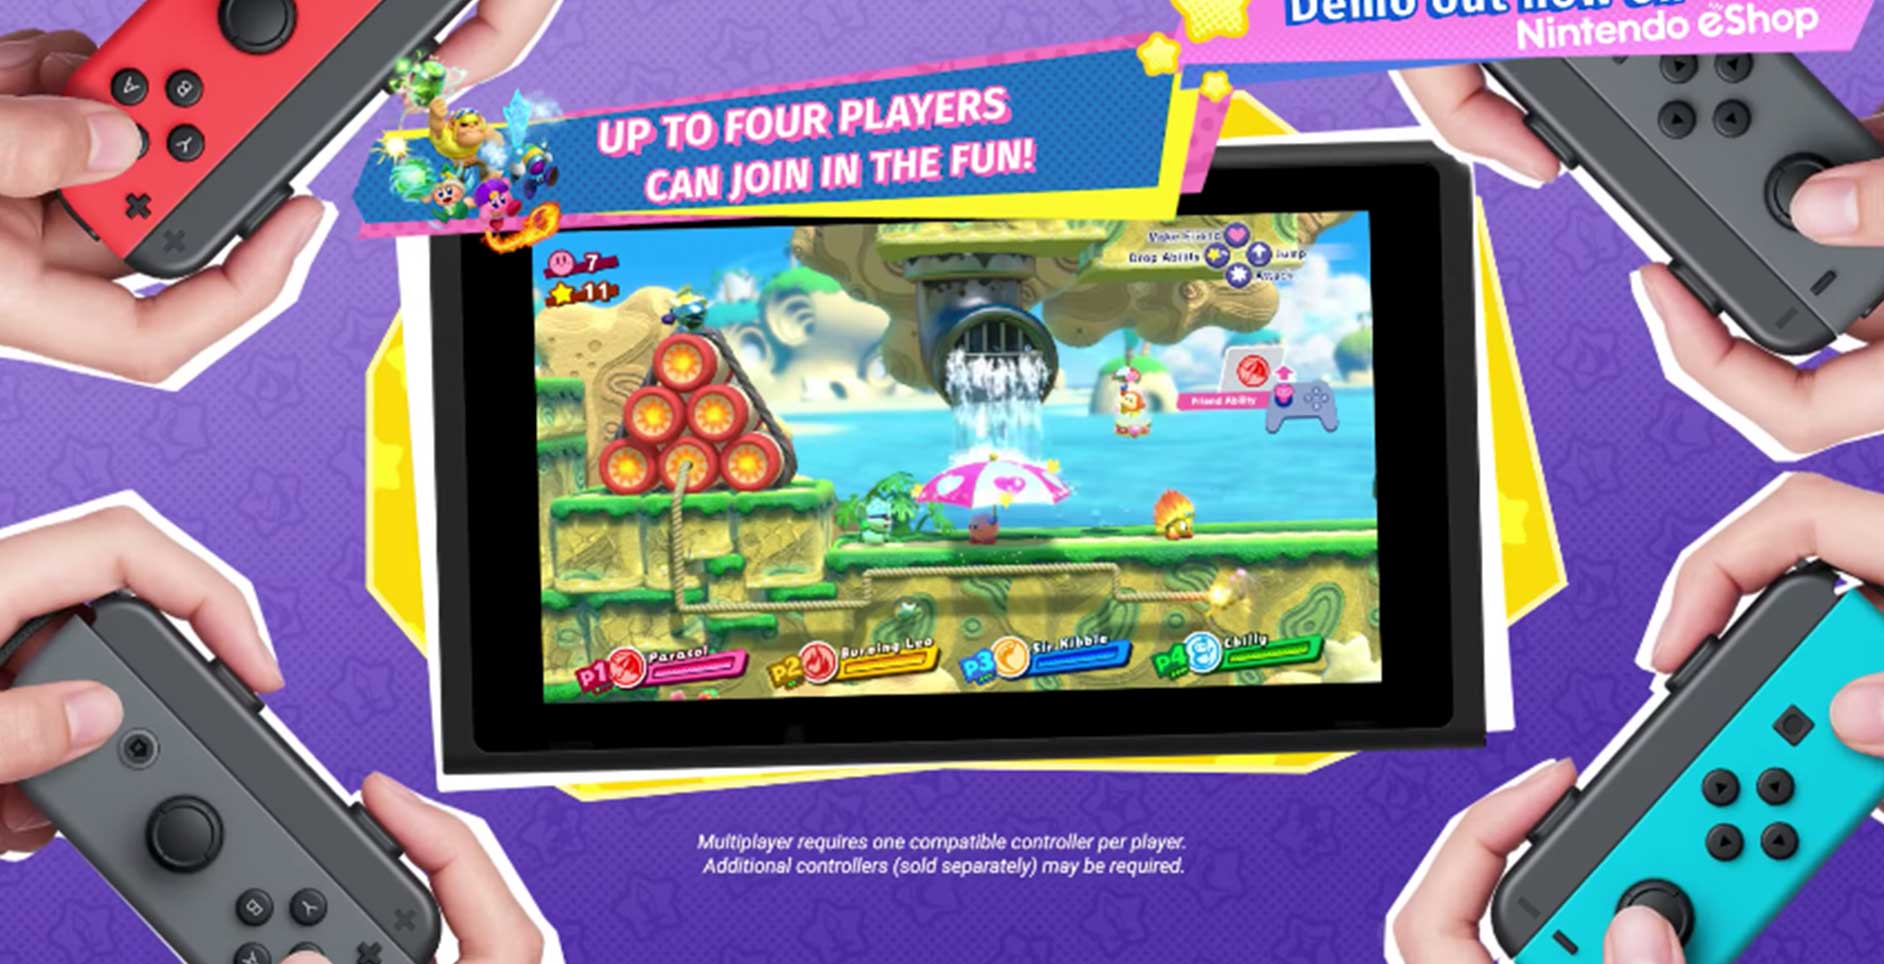 Your Nintendo Switch Just Got A Kirby: Star Allies Demo